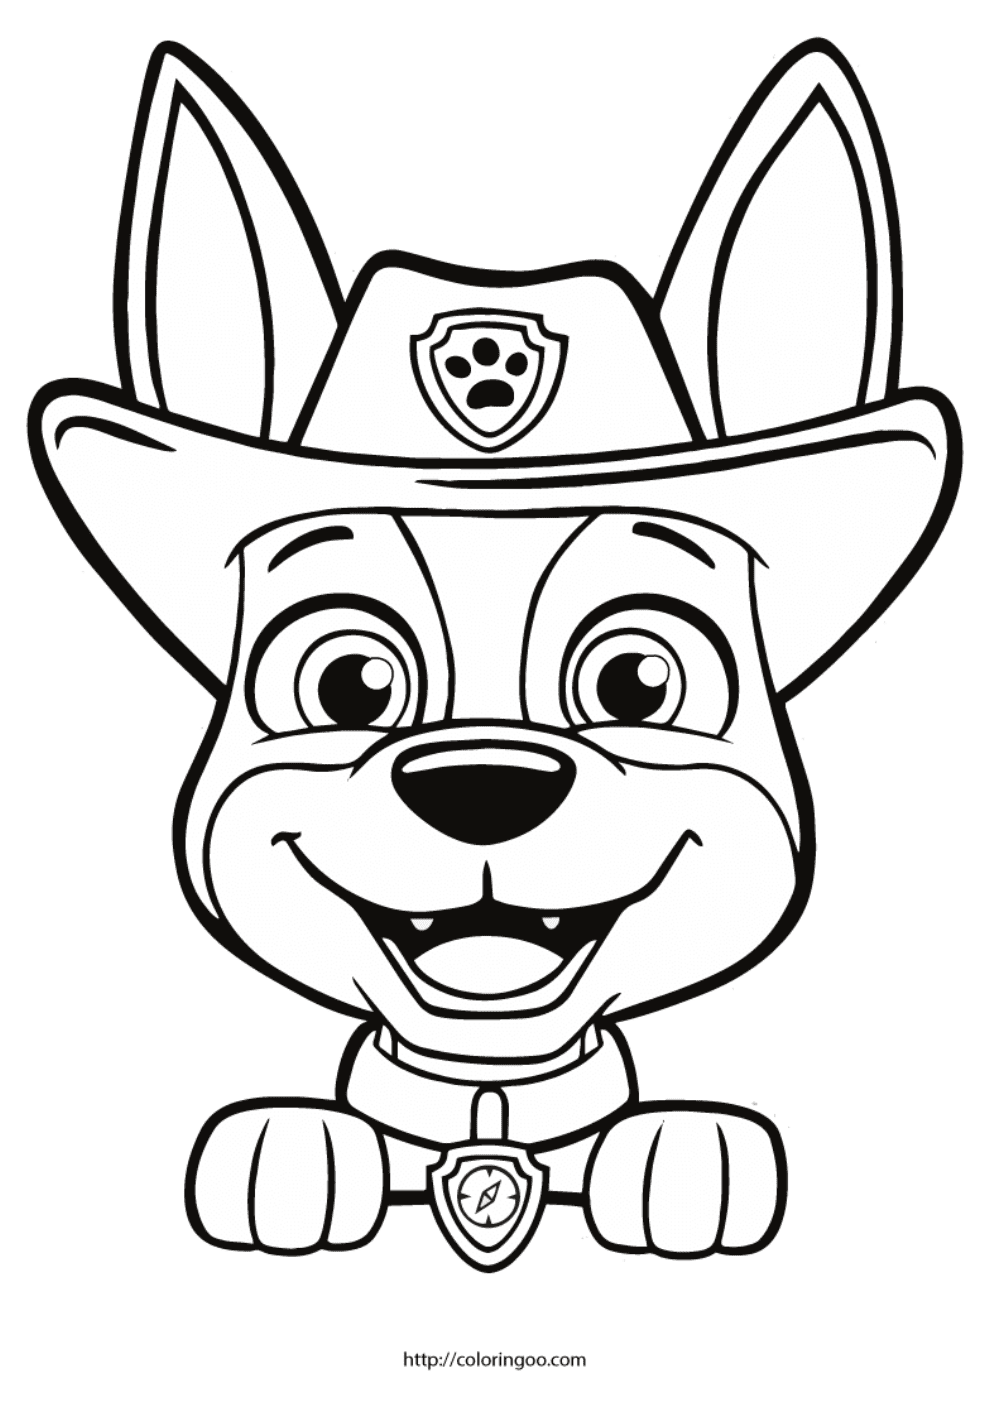 Paw Patrol Tracker Head Coloring Page